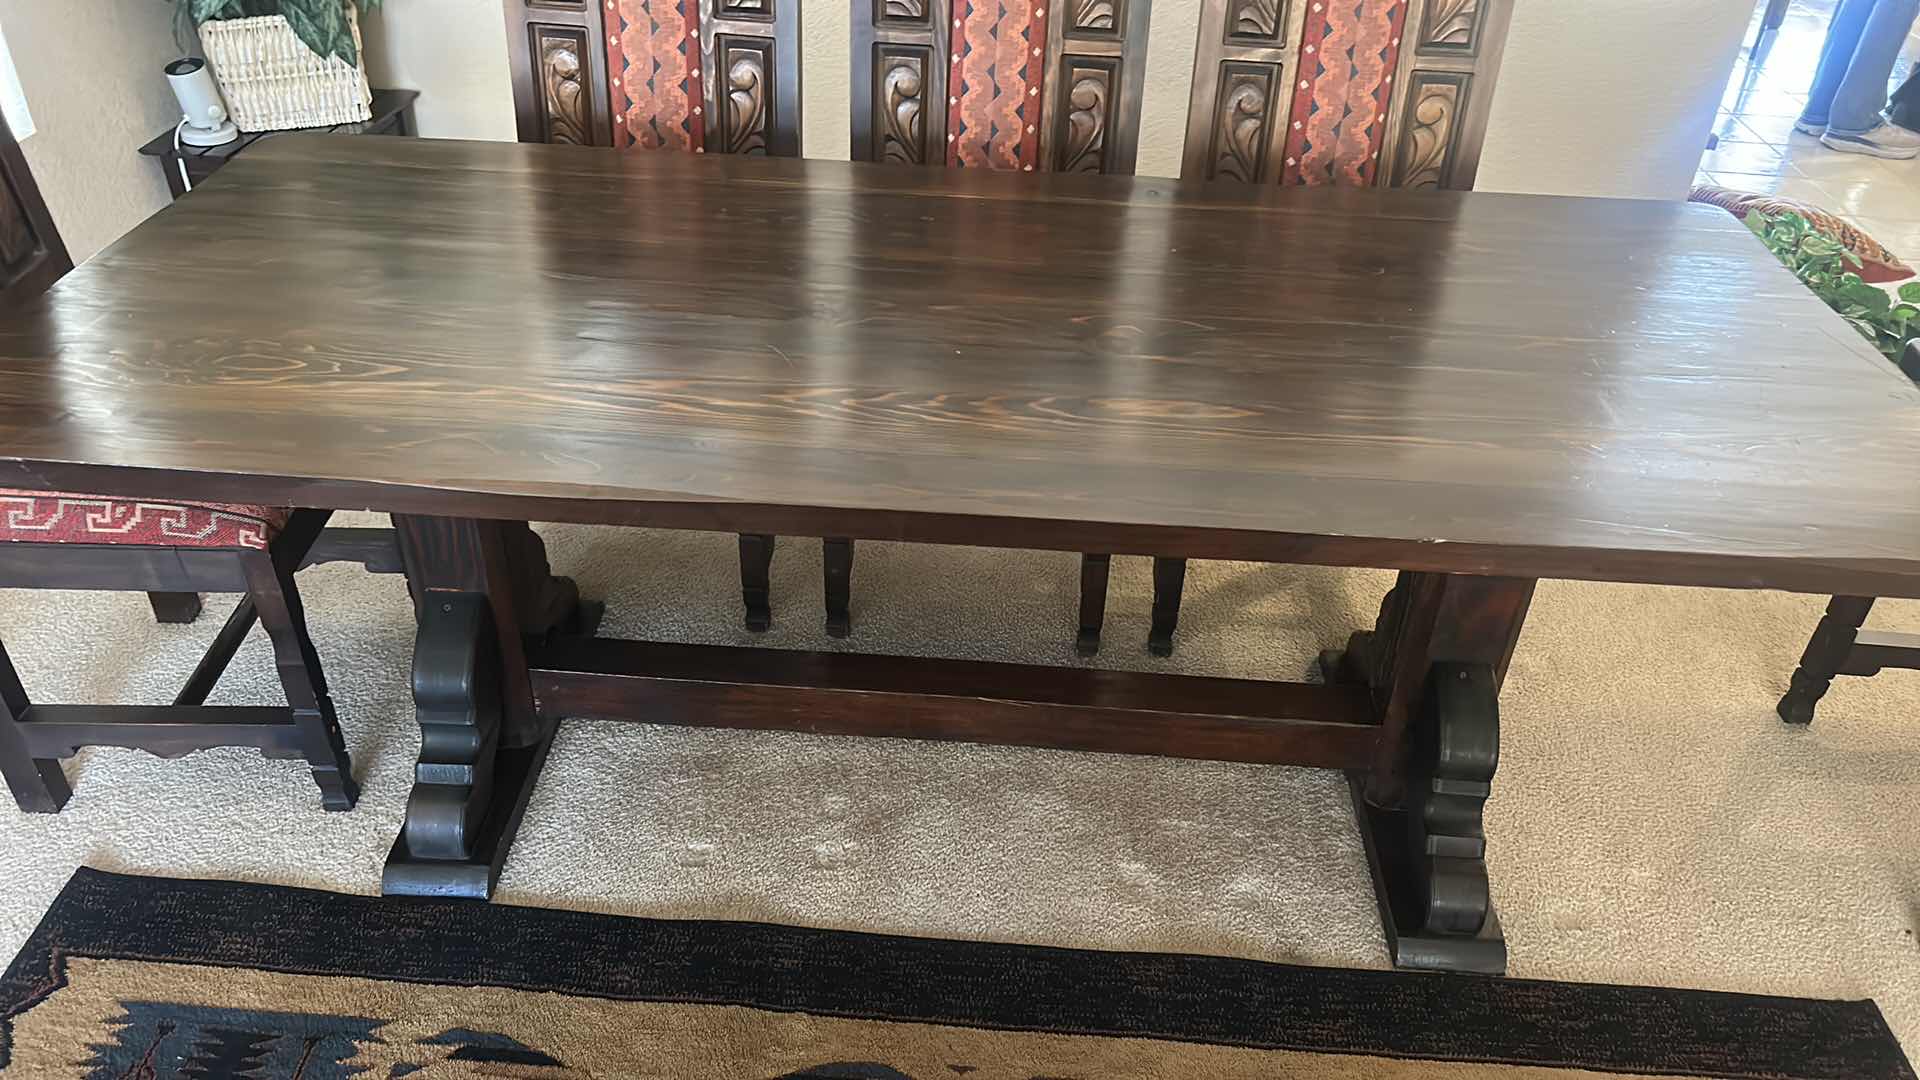 Photo 8 of CUSTOM DINING ROOM TABLE 7’ x 3’ x 29 1/2” PLUS TWO MORE CHAIRS NOT PICTURED